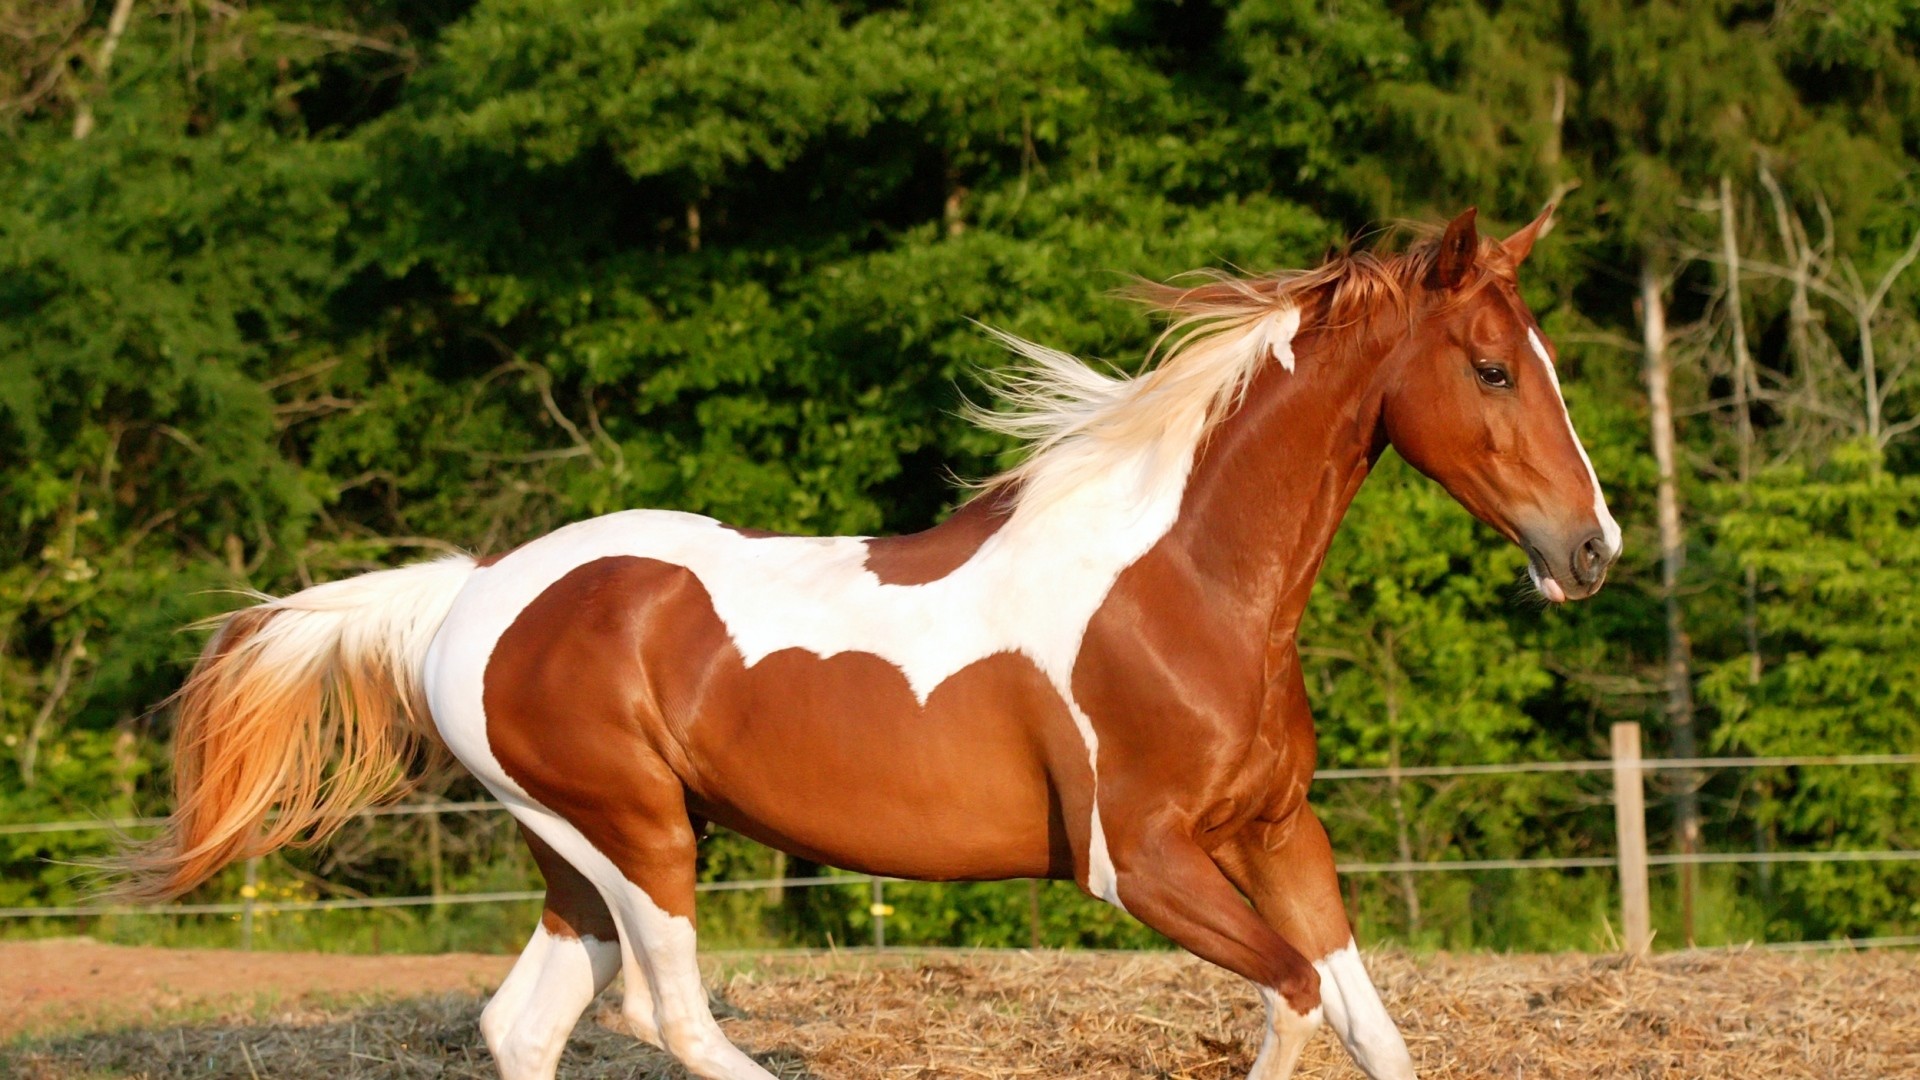 1920x1080 Full HD 1080p Horse Wallpapers HD, Desktop Backgrounds , Images  and Pictures